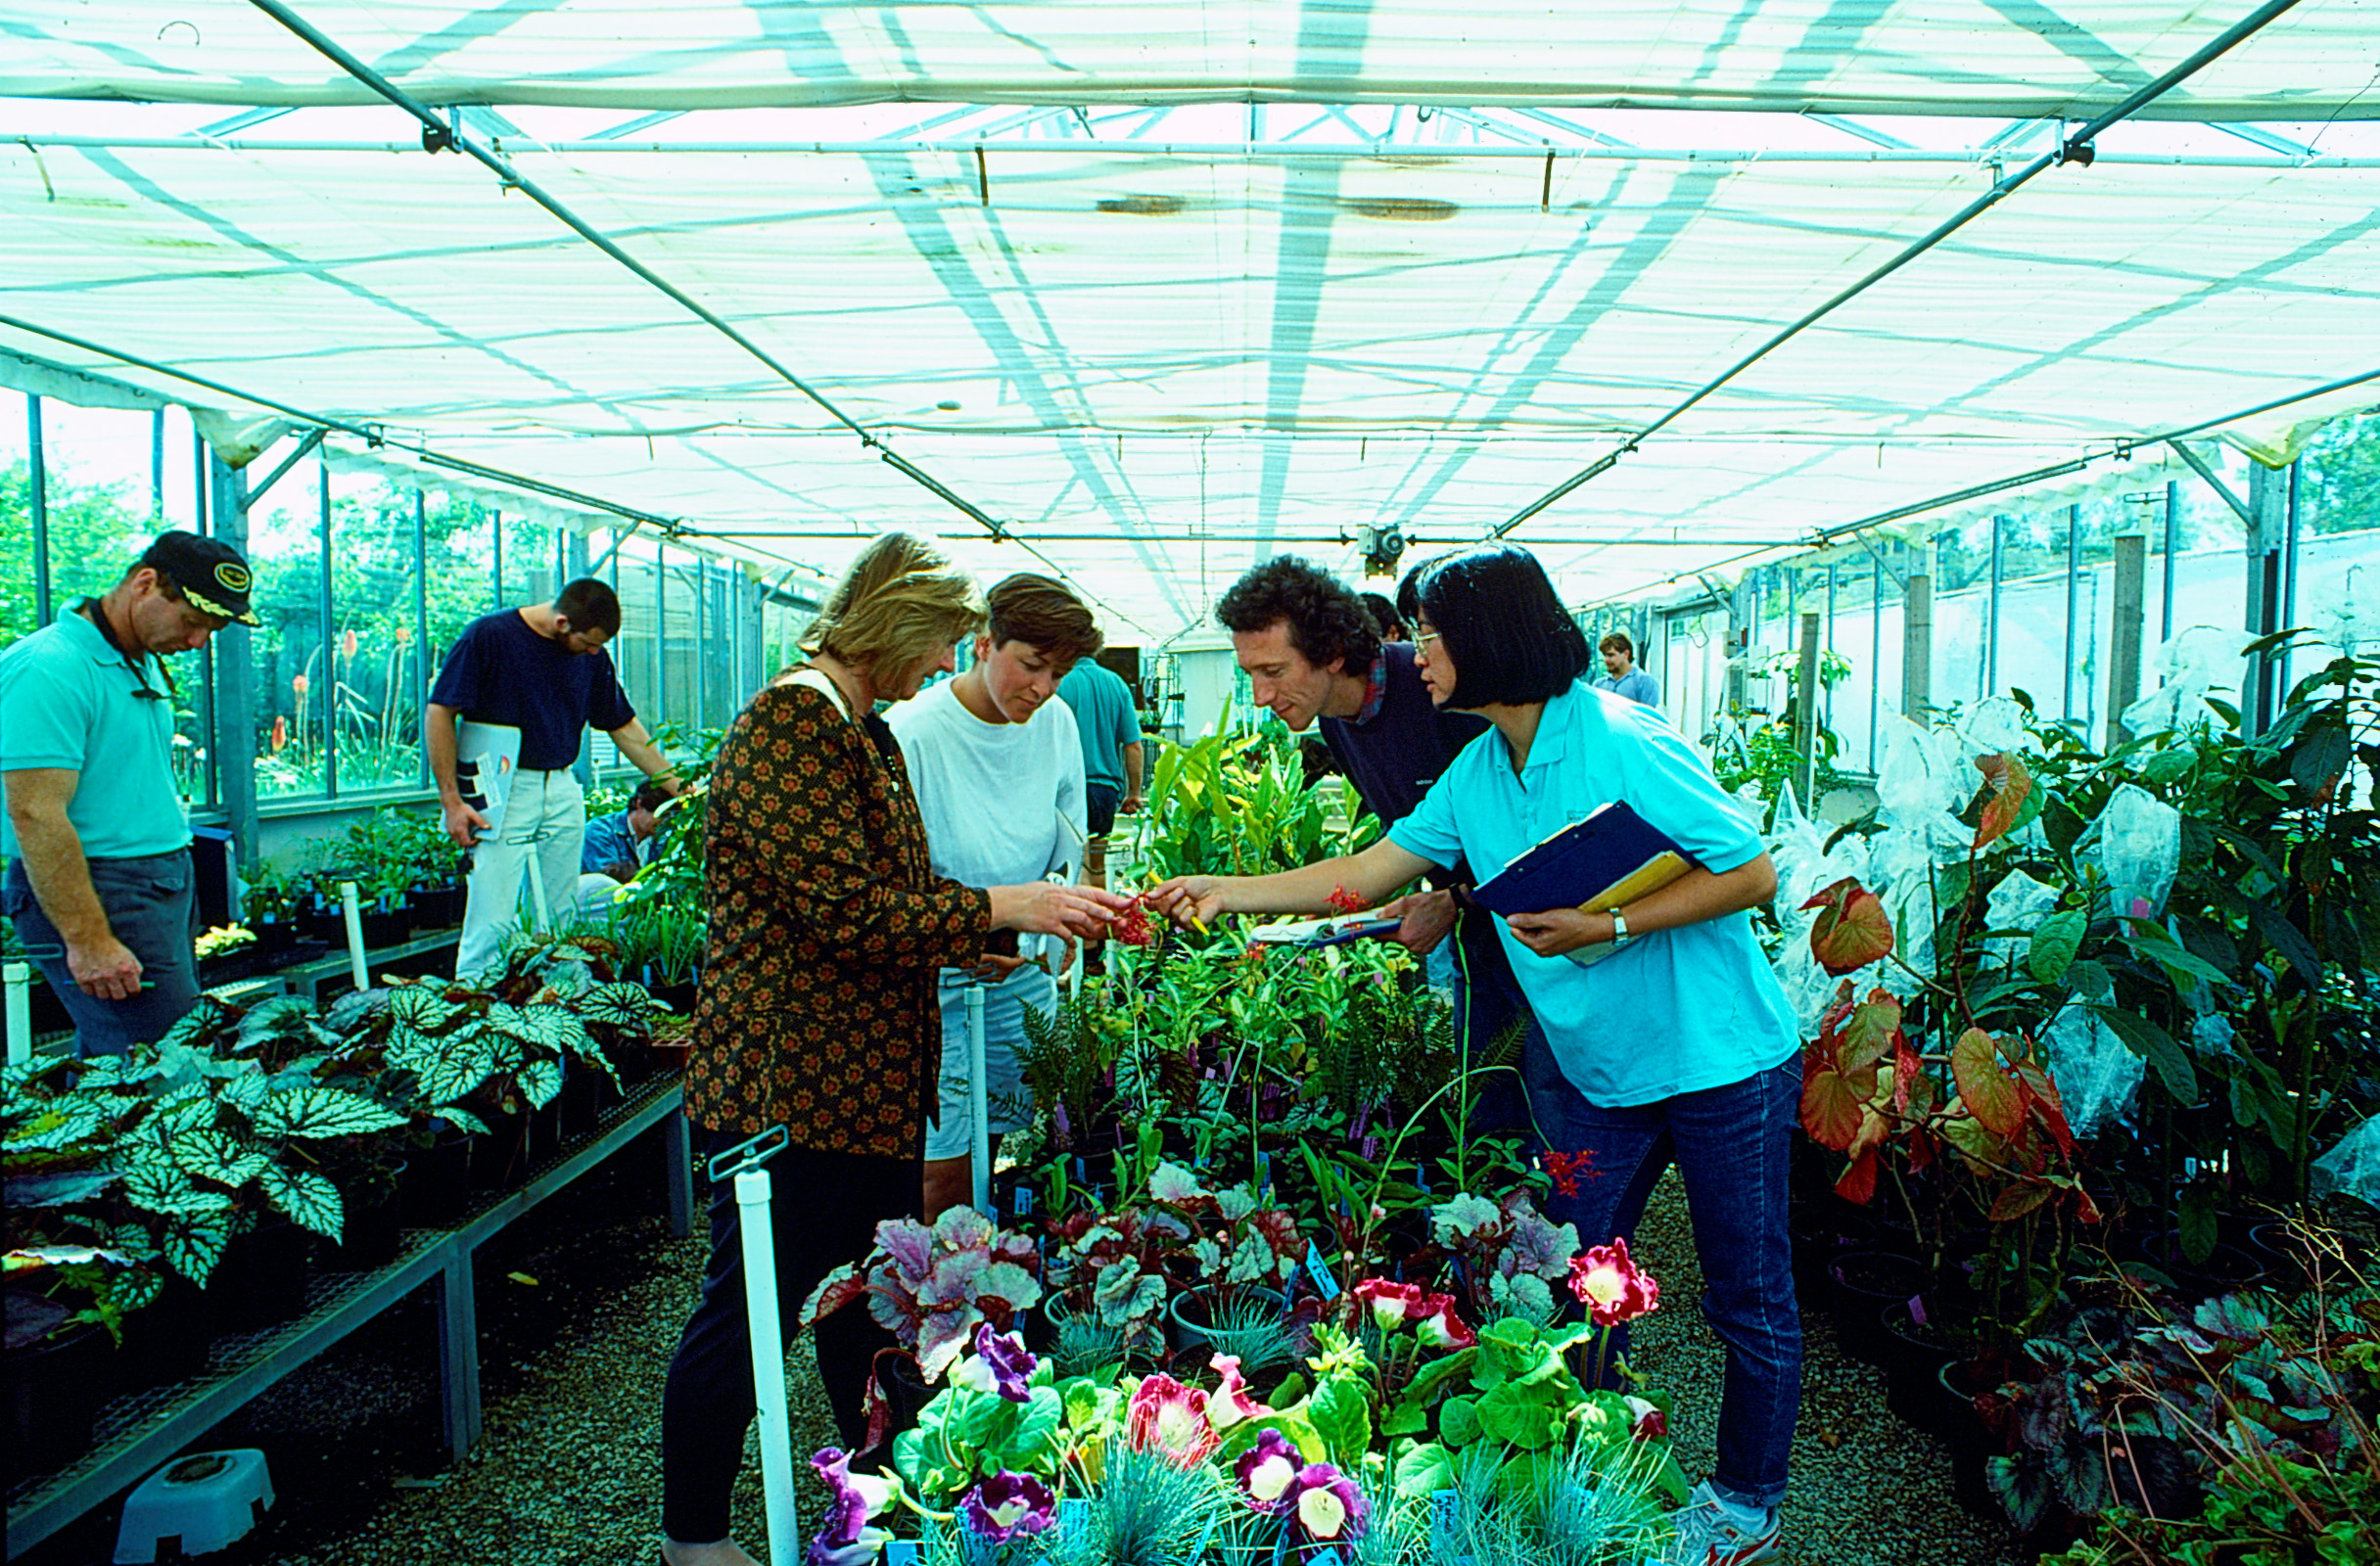 Students in a greenhouse, looking at plants